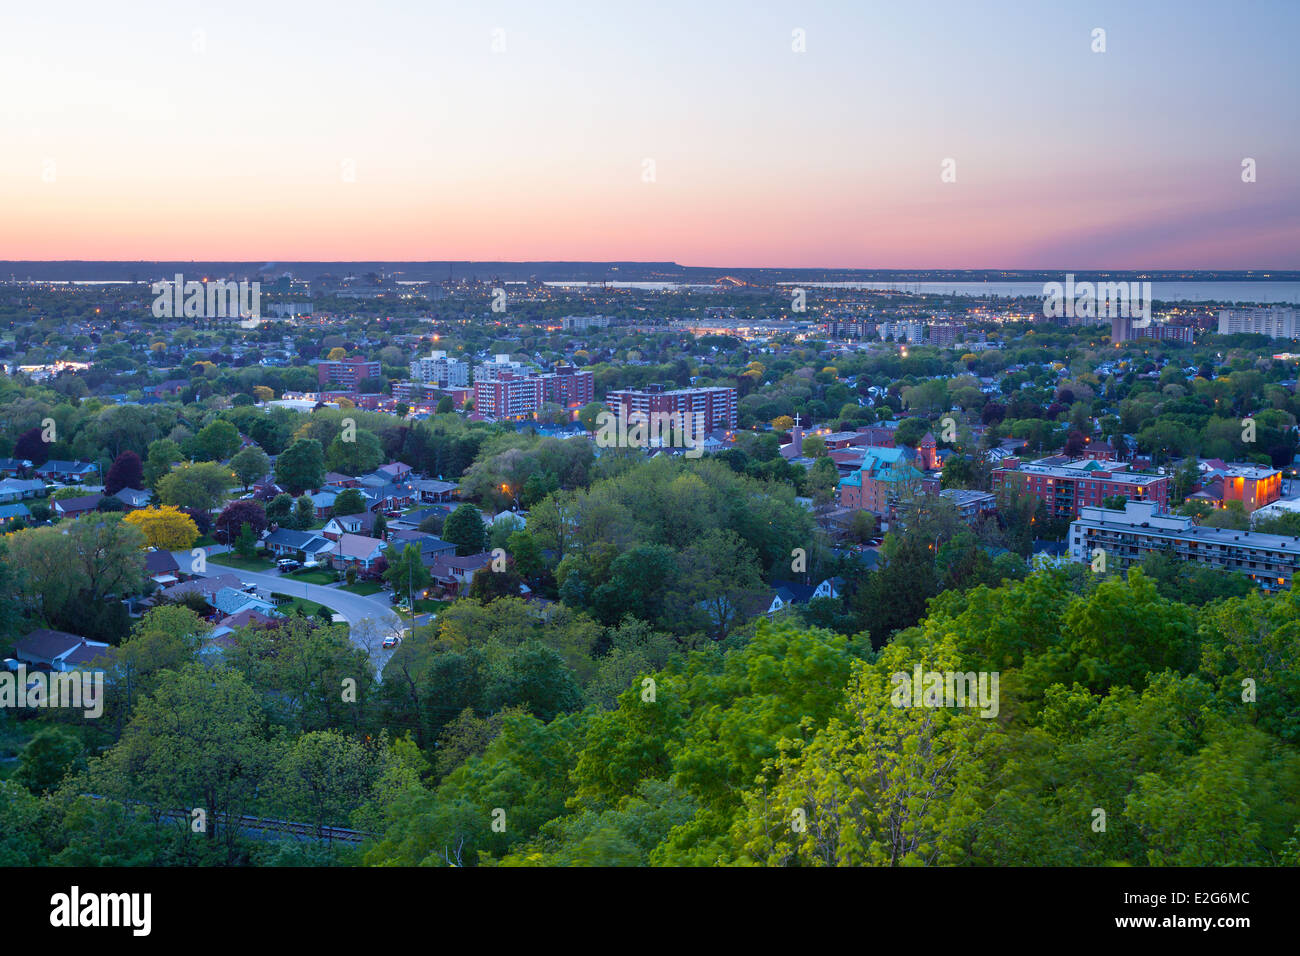 A view of Southern Hamilton from a lookout near Devil's Punchbowl at sunset. Hamilton, Ontario, Canada. Stock Photo